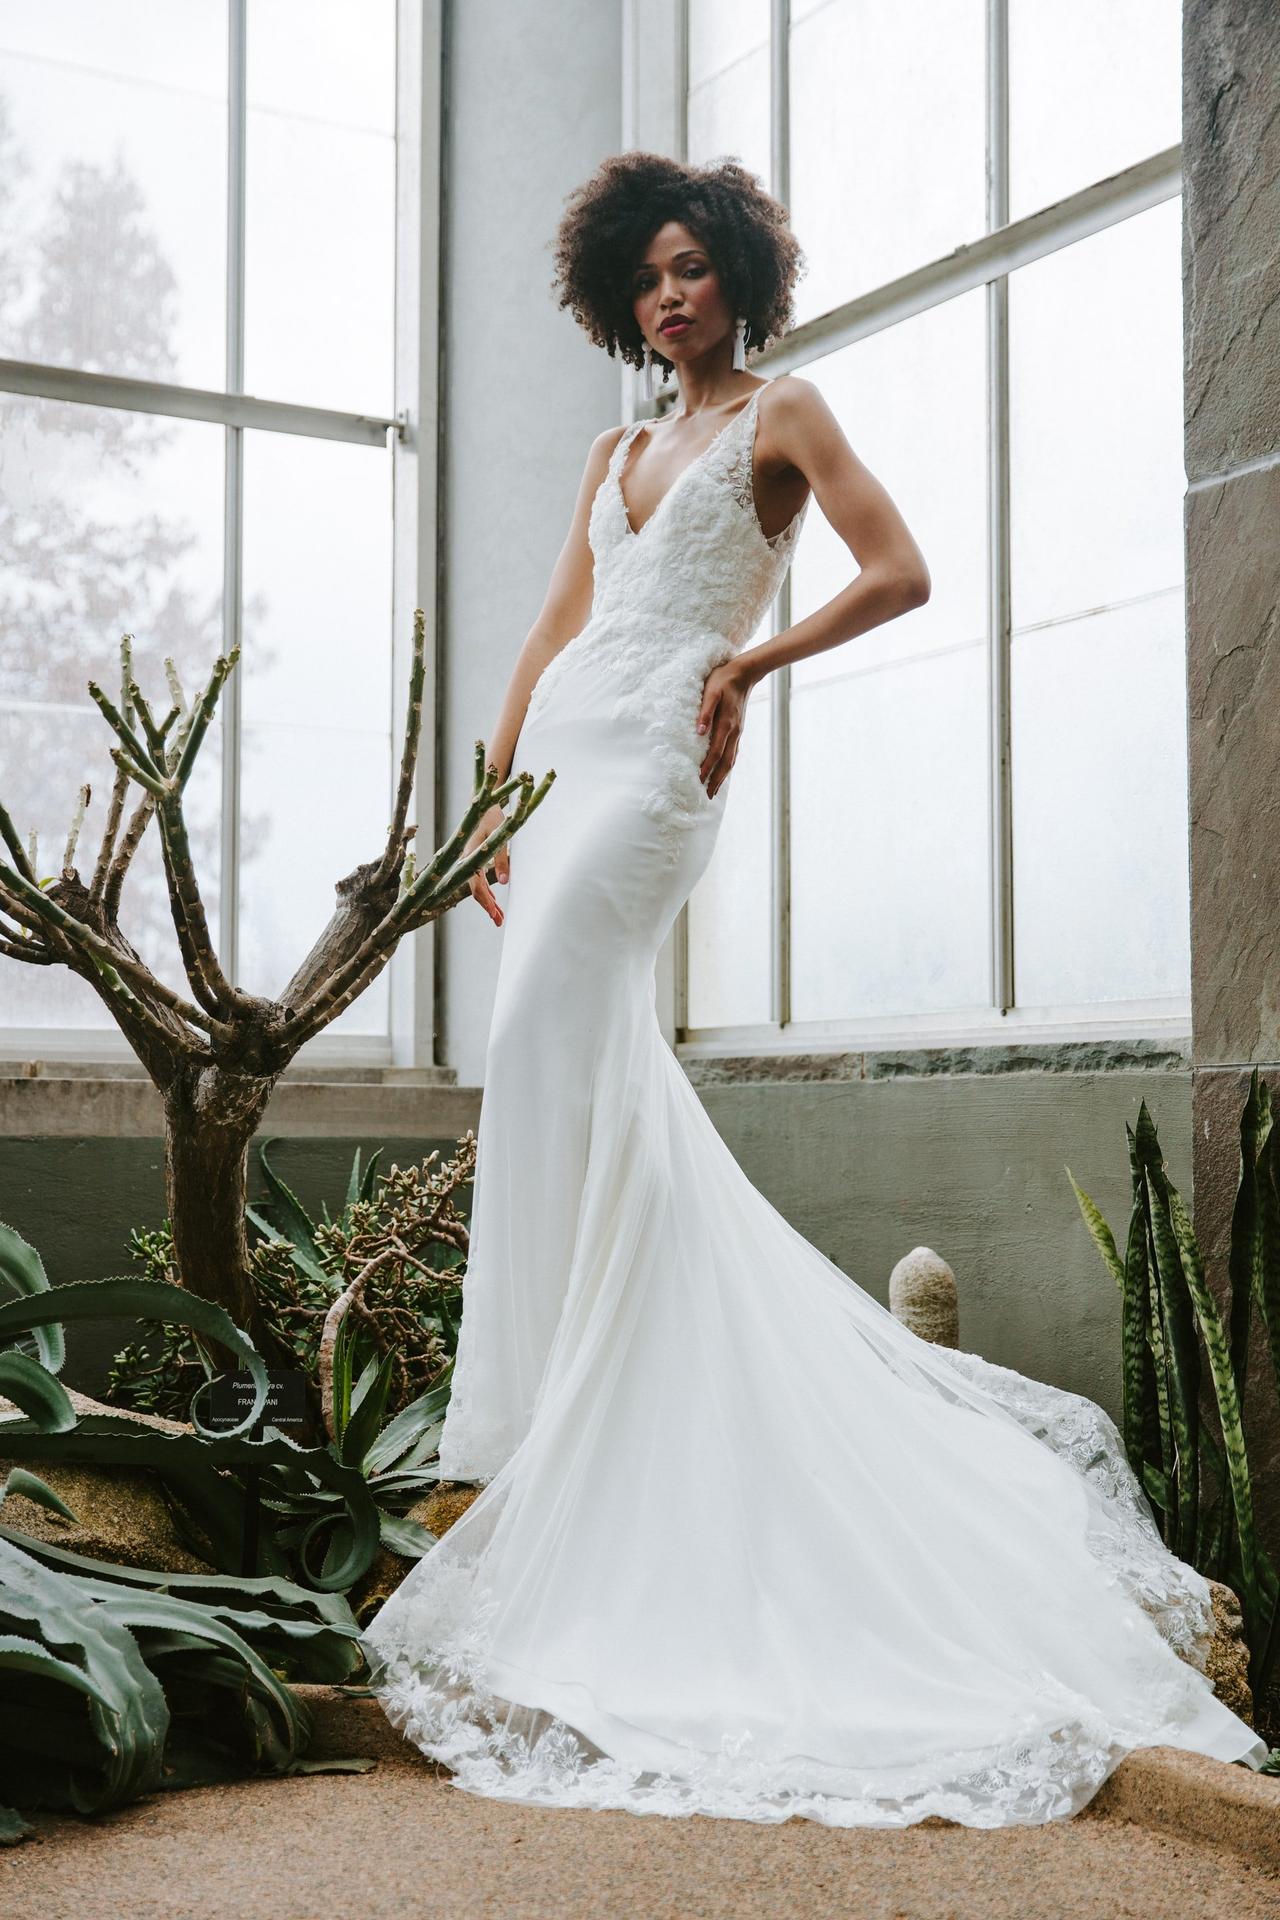 Expert Advice For Wedding Dress Fittings, Alterations, How To